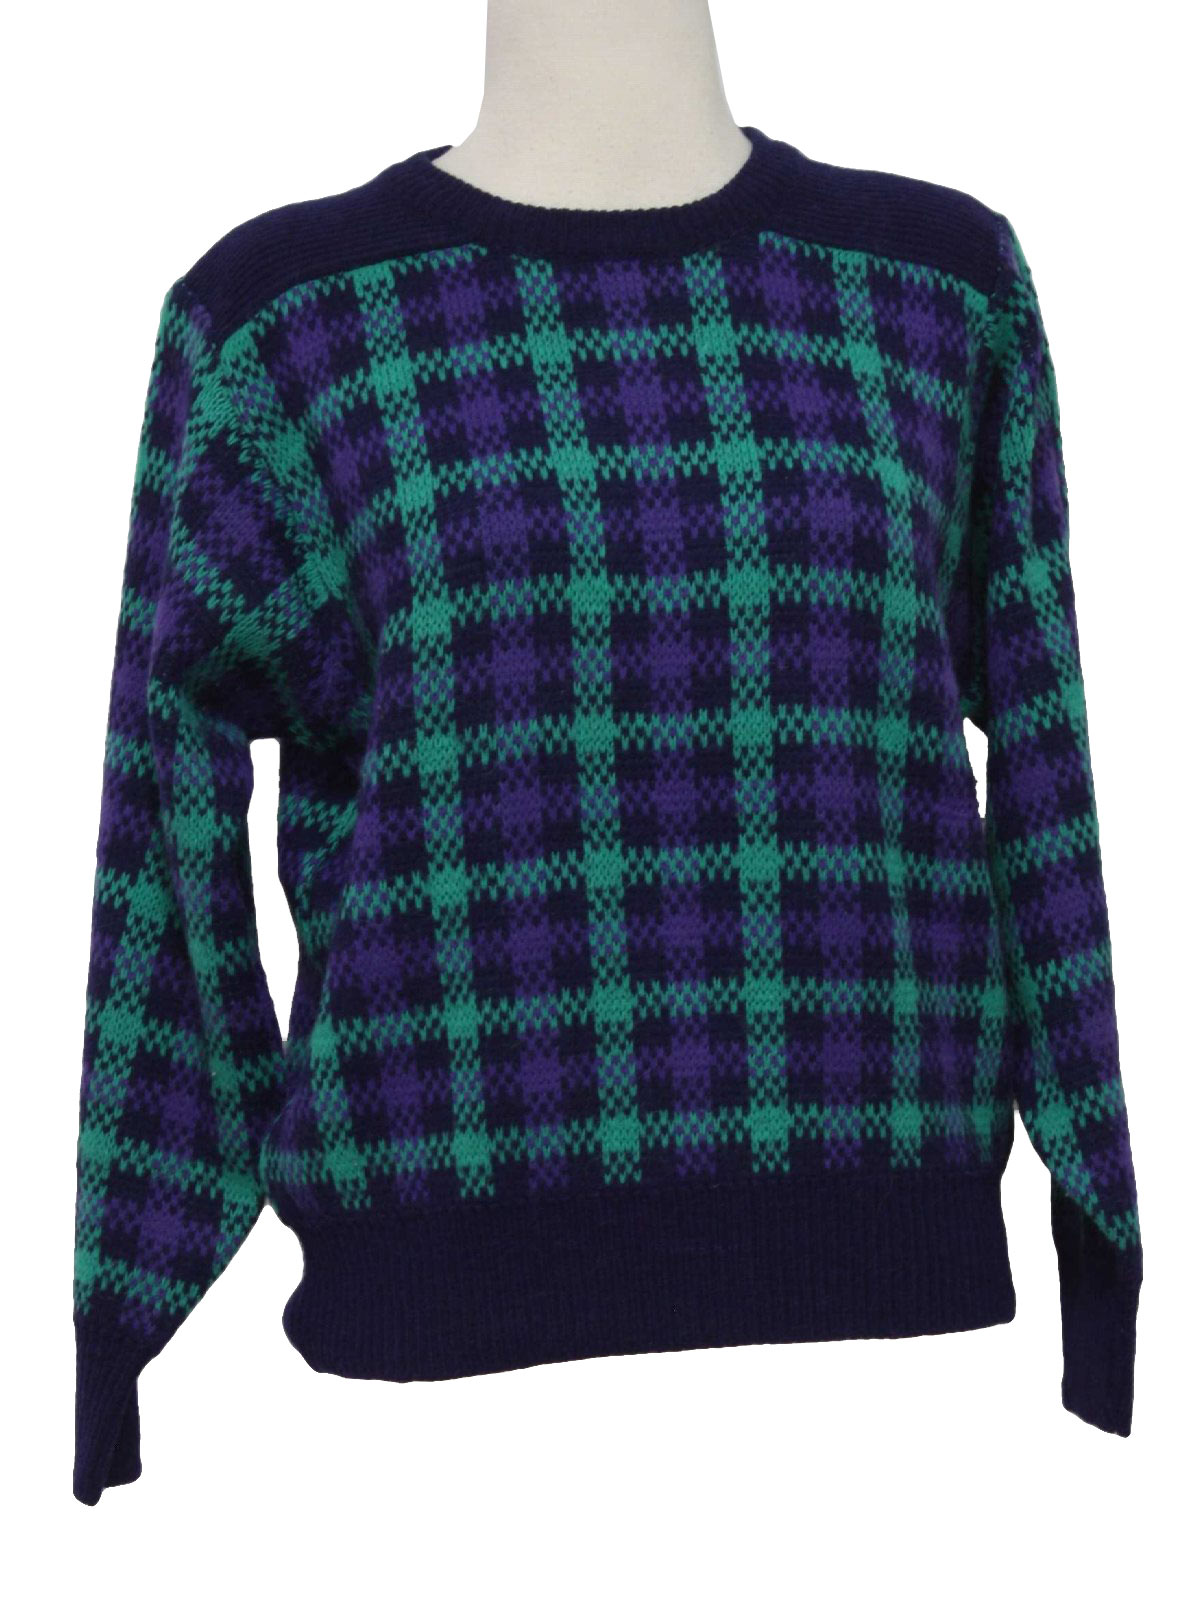 Desire 1980s Vintage Sweater: 80s -Desire- Womens purple, green and ...